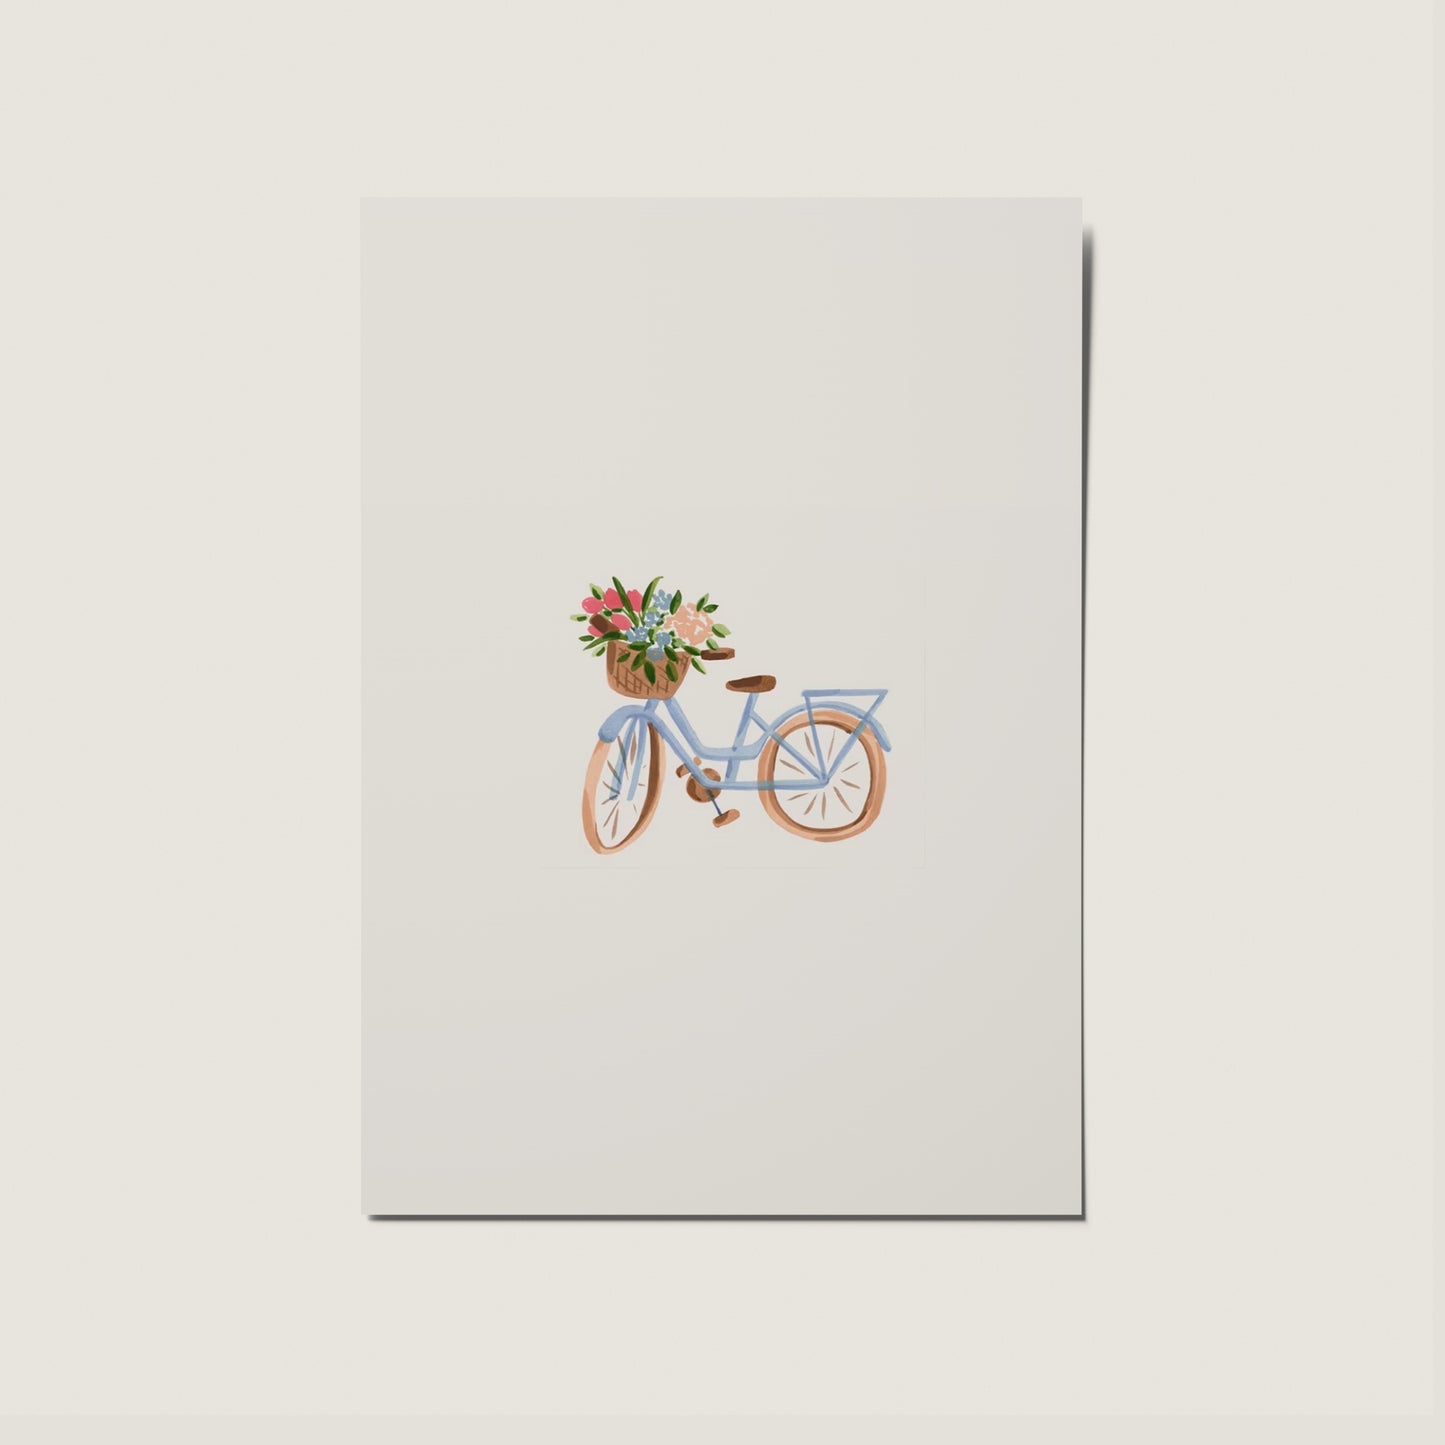 Watercolour Bike with Flowers No Occasion Minimal Simple Card